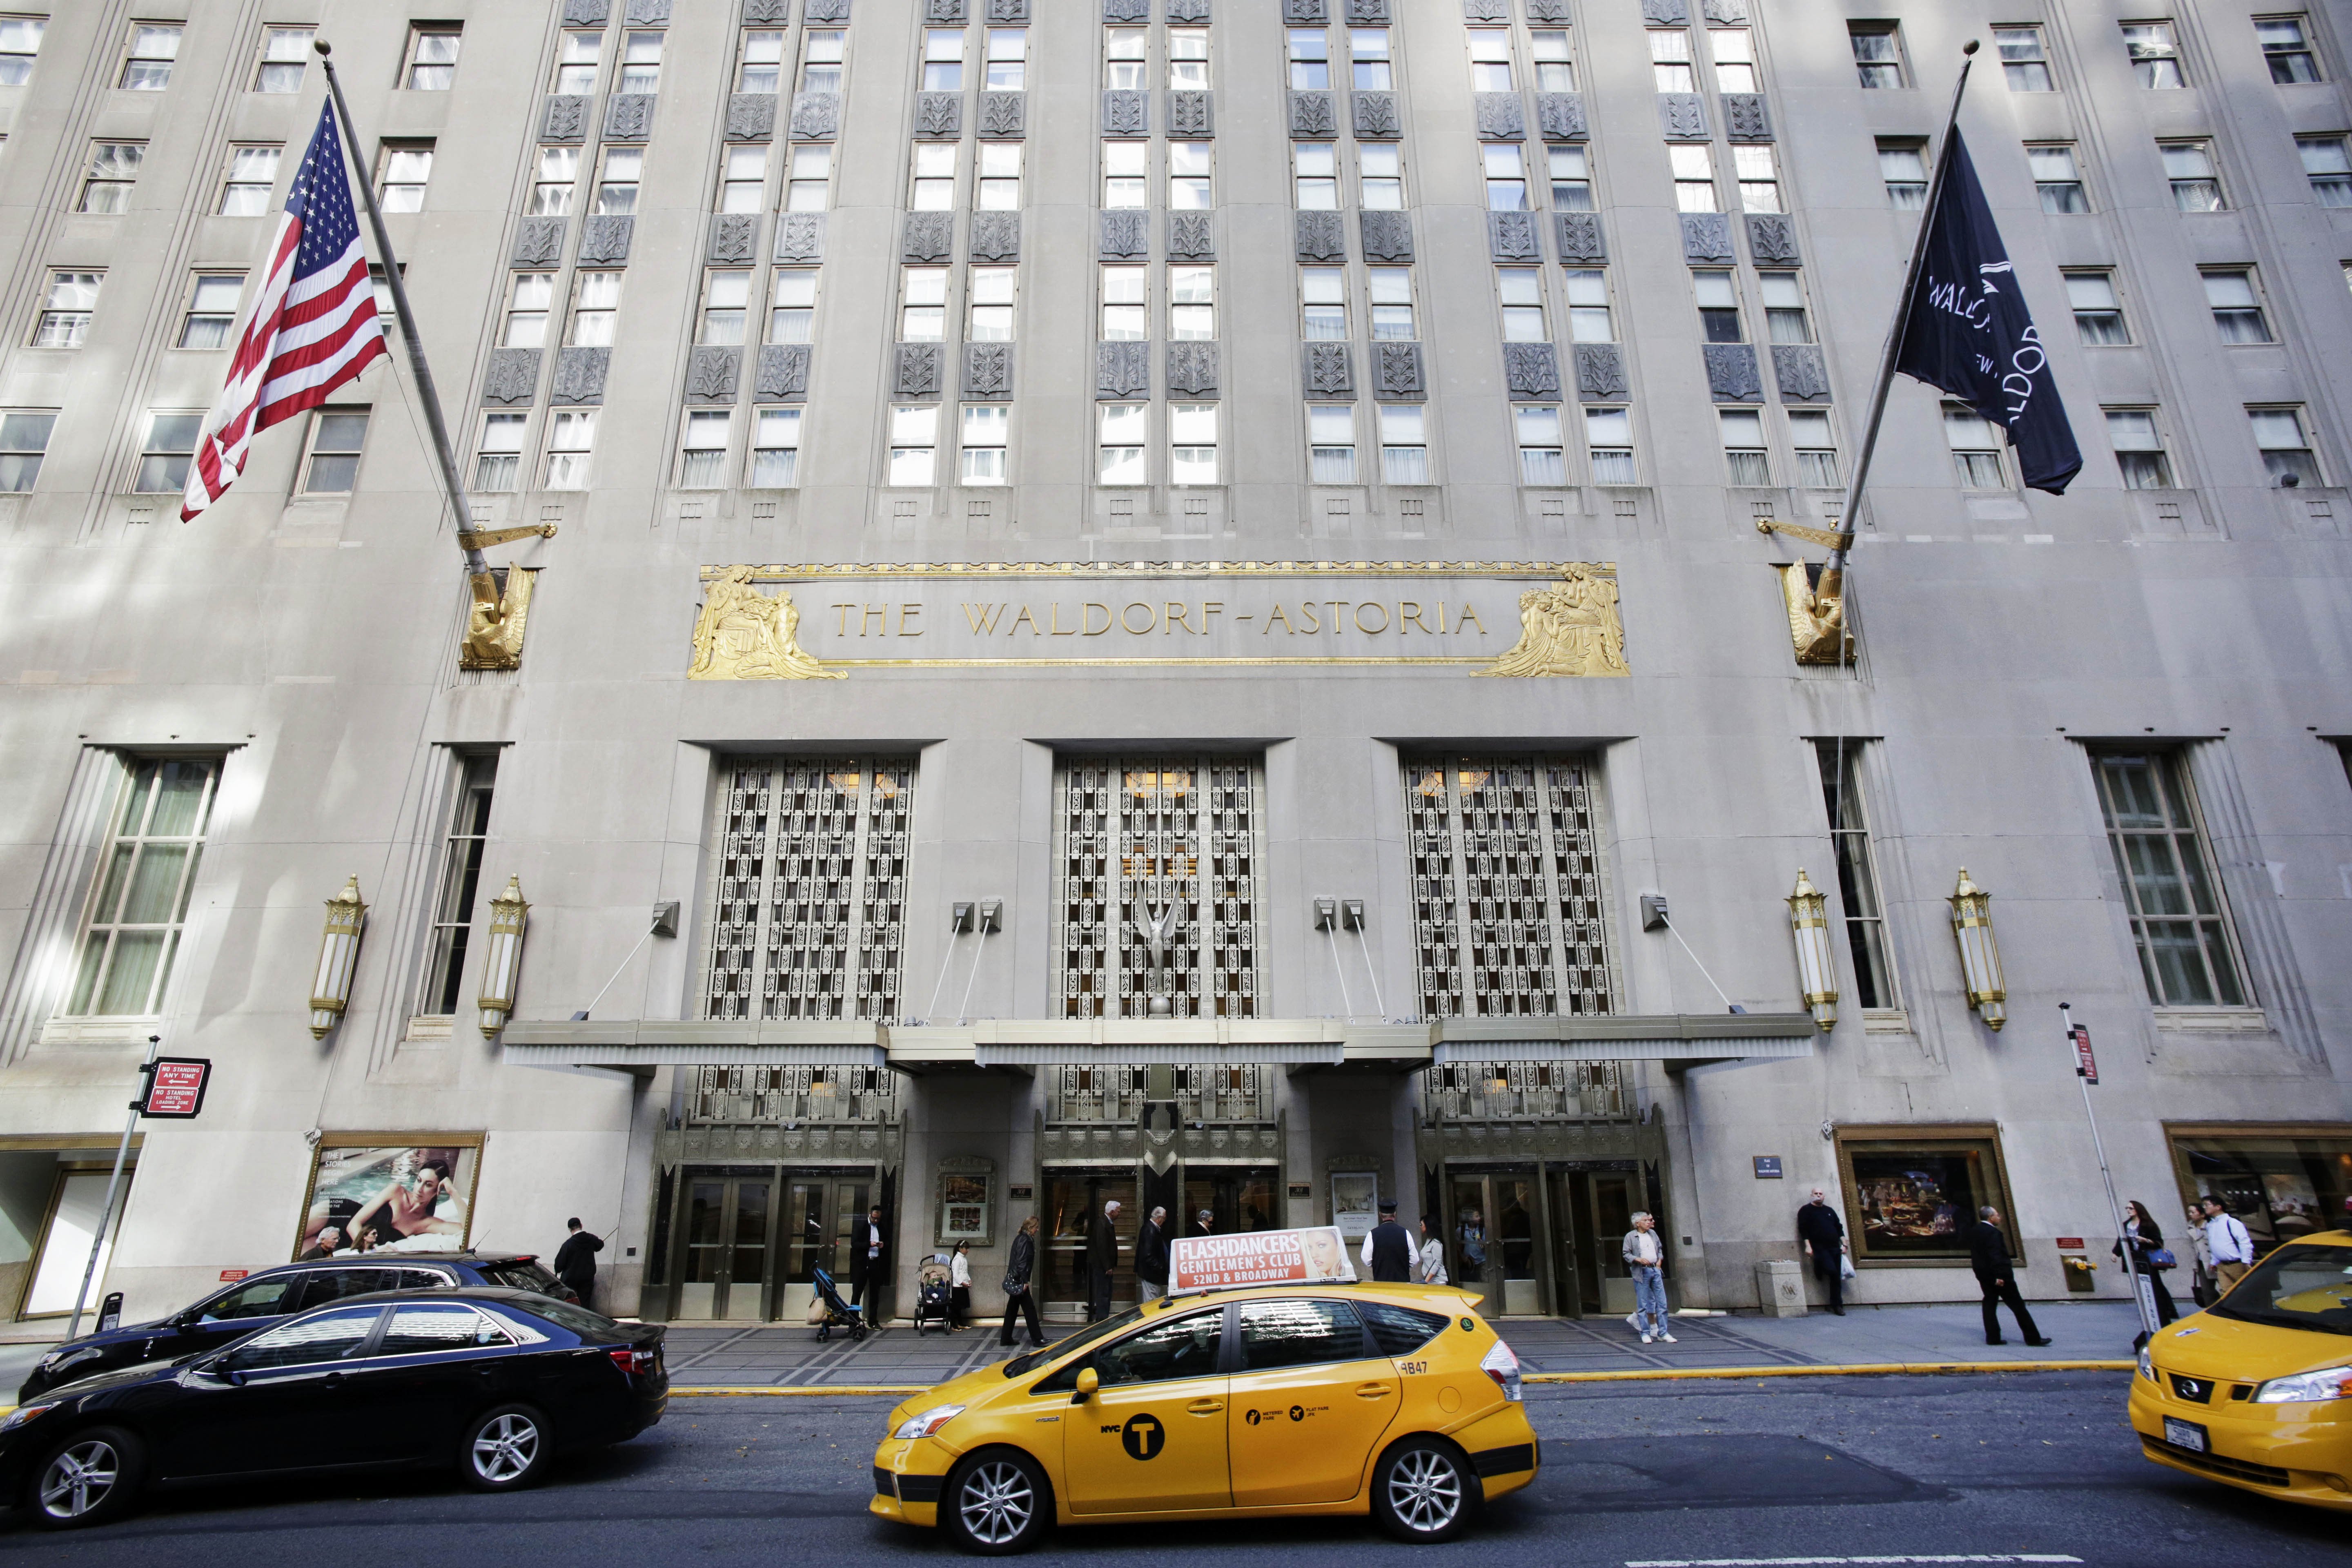 FILE - In this Oct. 6, 2014 file photo, a taxi passes in front of the fabled Waldorf Astoria hotel in New York. The State Department will abandon decades of tradition at the annual UN General Assembly this fall by setting up shop in a hotel other than New Yorks famed Waldorf-Astoria, which was purchased last year by a Chinese company. (AP Photo/Mark Lennihan, File)